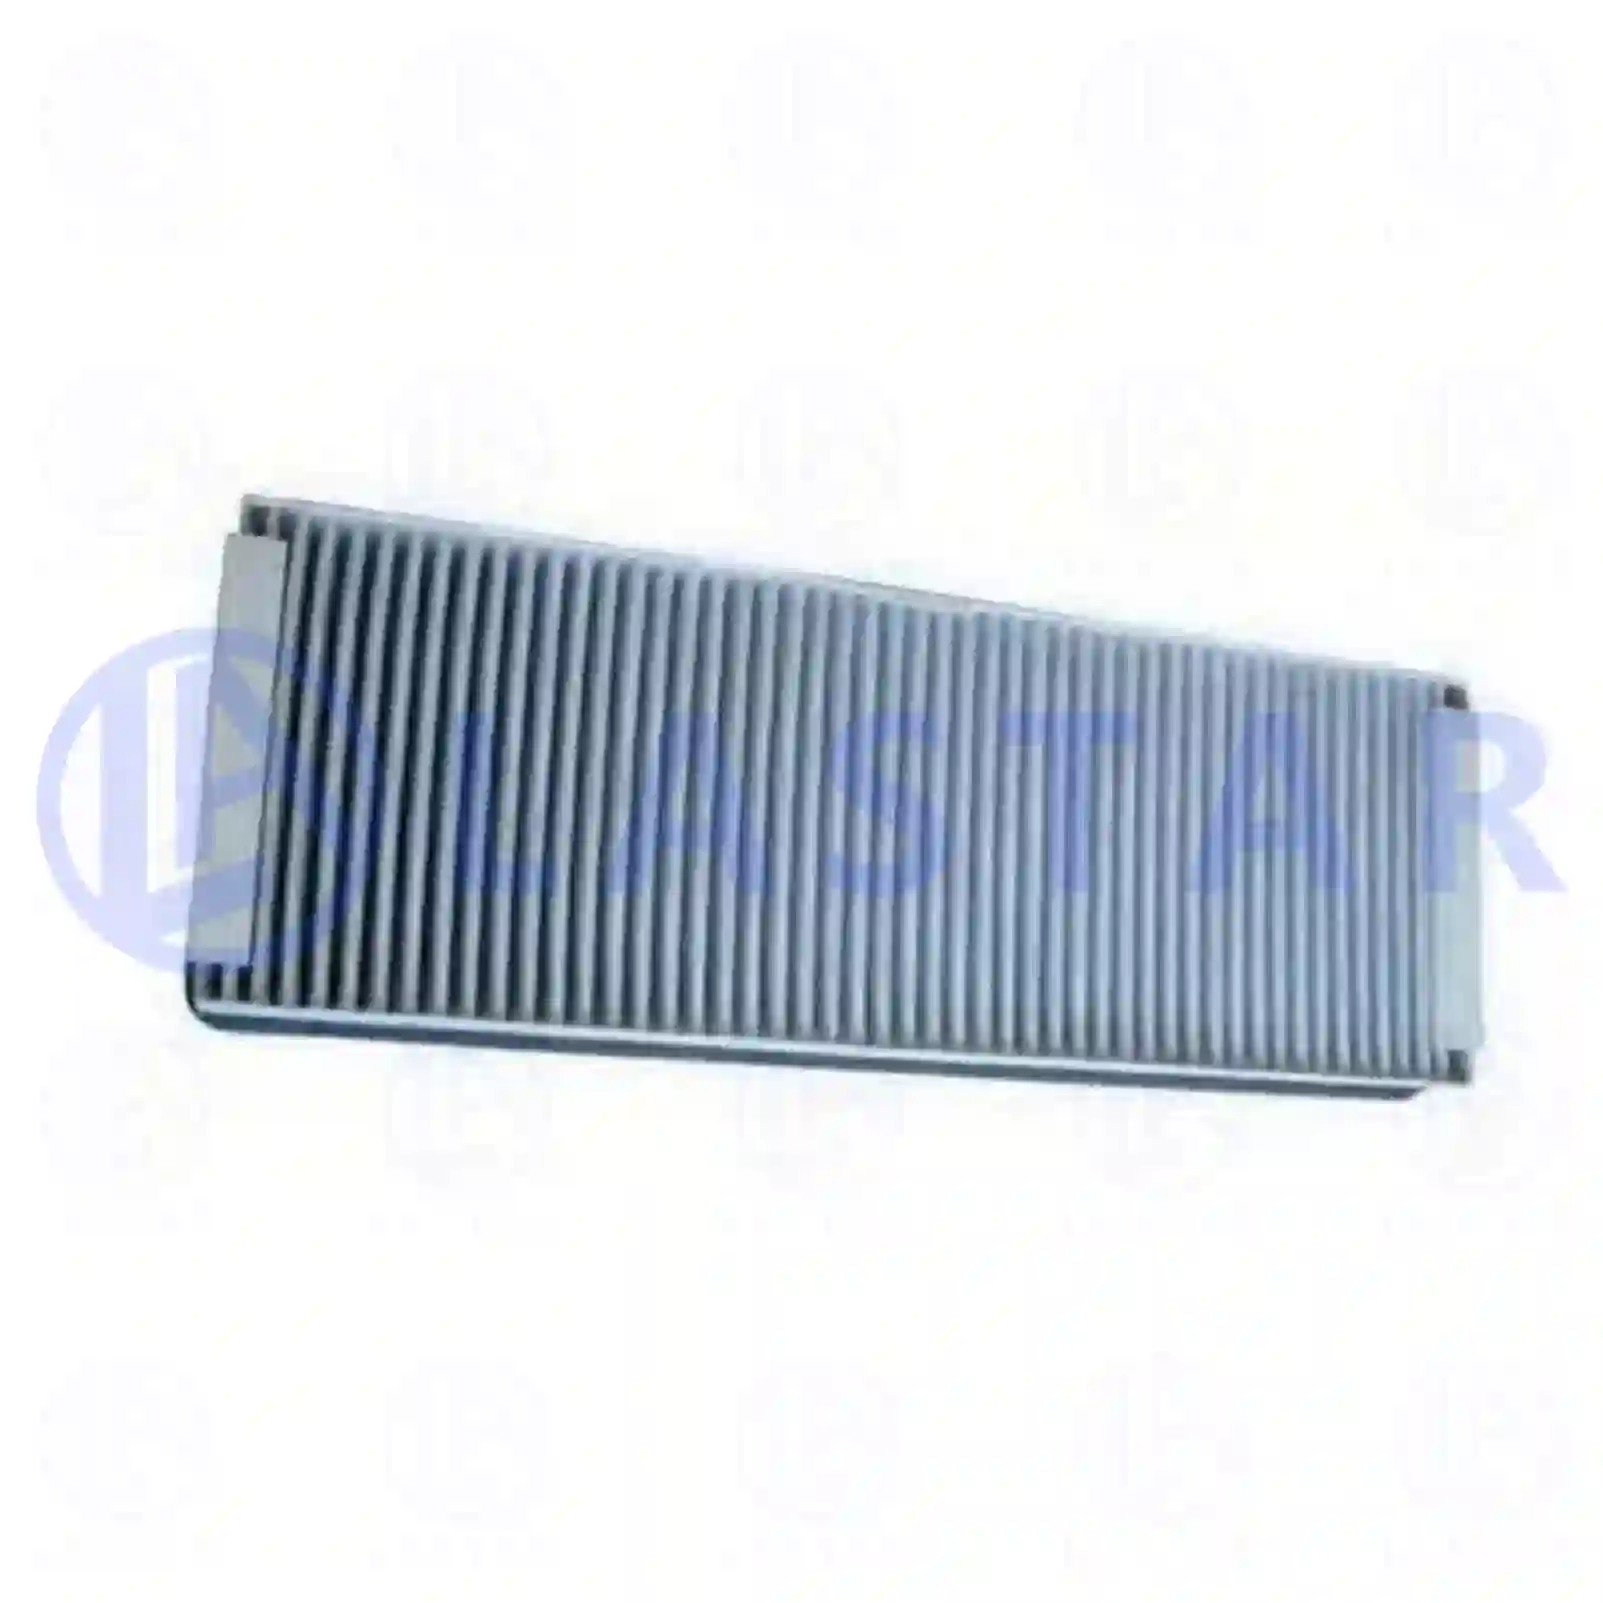 Cabin air filter, activated carbon, 77734888, 0008301318, 0008303418, ZG60262-0008, ||  77734888 Lastar Spare Part | Truck Spare Parts, Auotomotive Spare Parts Cabin air filter, activated carbon, 77734888, 0008301318, 0008303418, ZG60262-0008, ||  77734888 Lastar Spare Part | Truck Spare Parts, Auotomotive Spare Parts